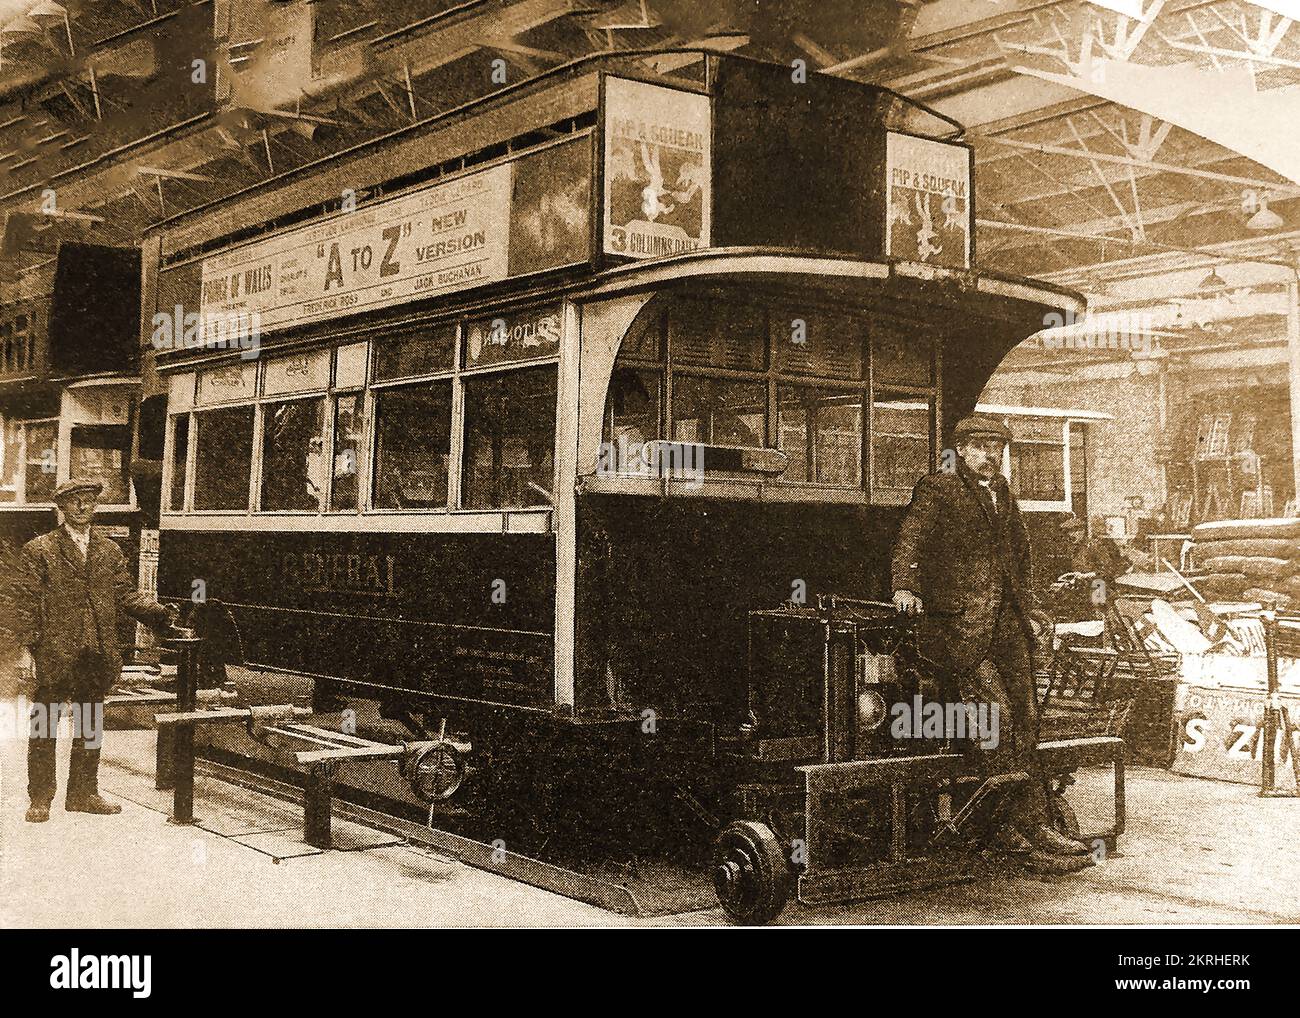 A 1930's British London open topped double-decker omnibus in the depot for repair and refurbishment.. Stock Photo